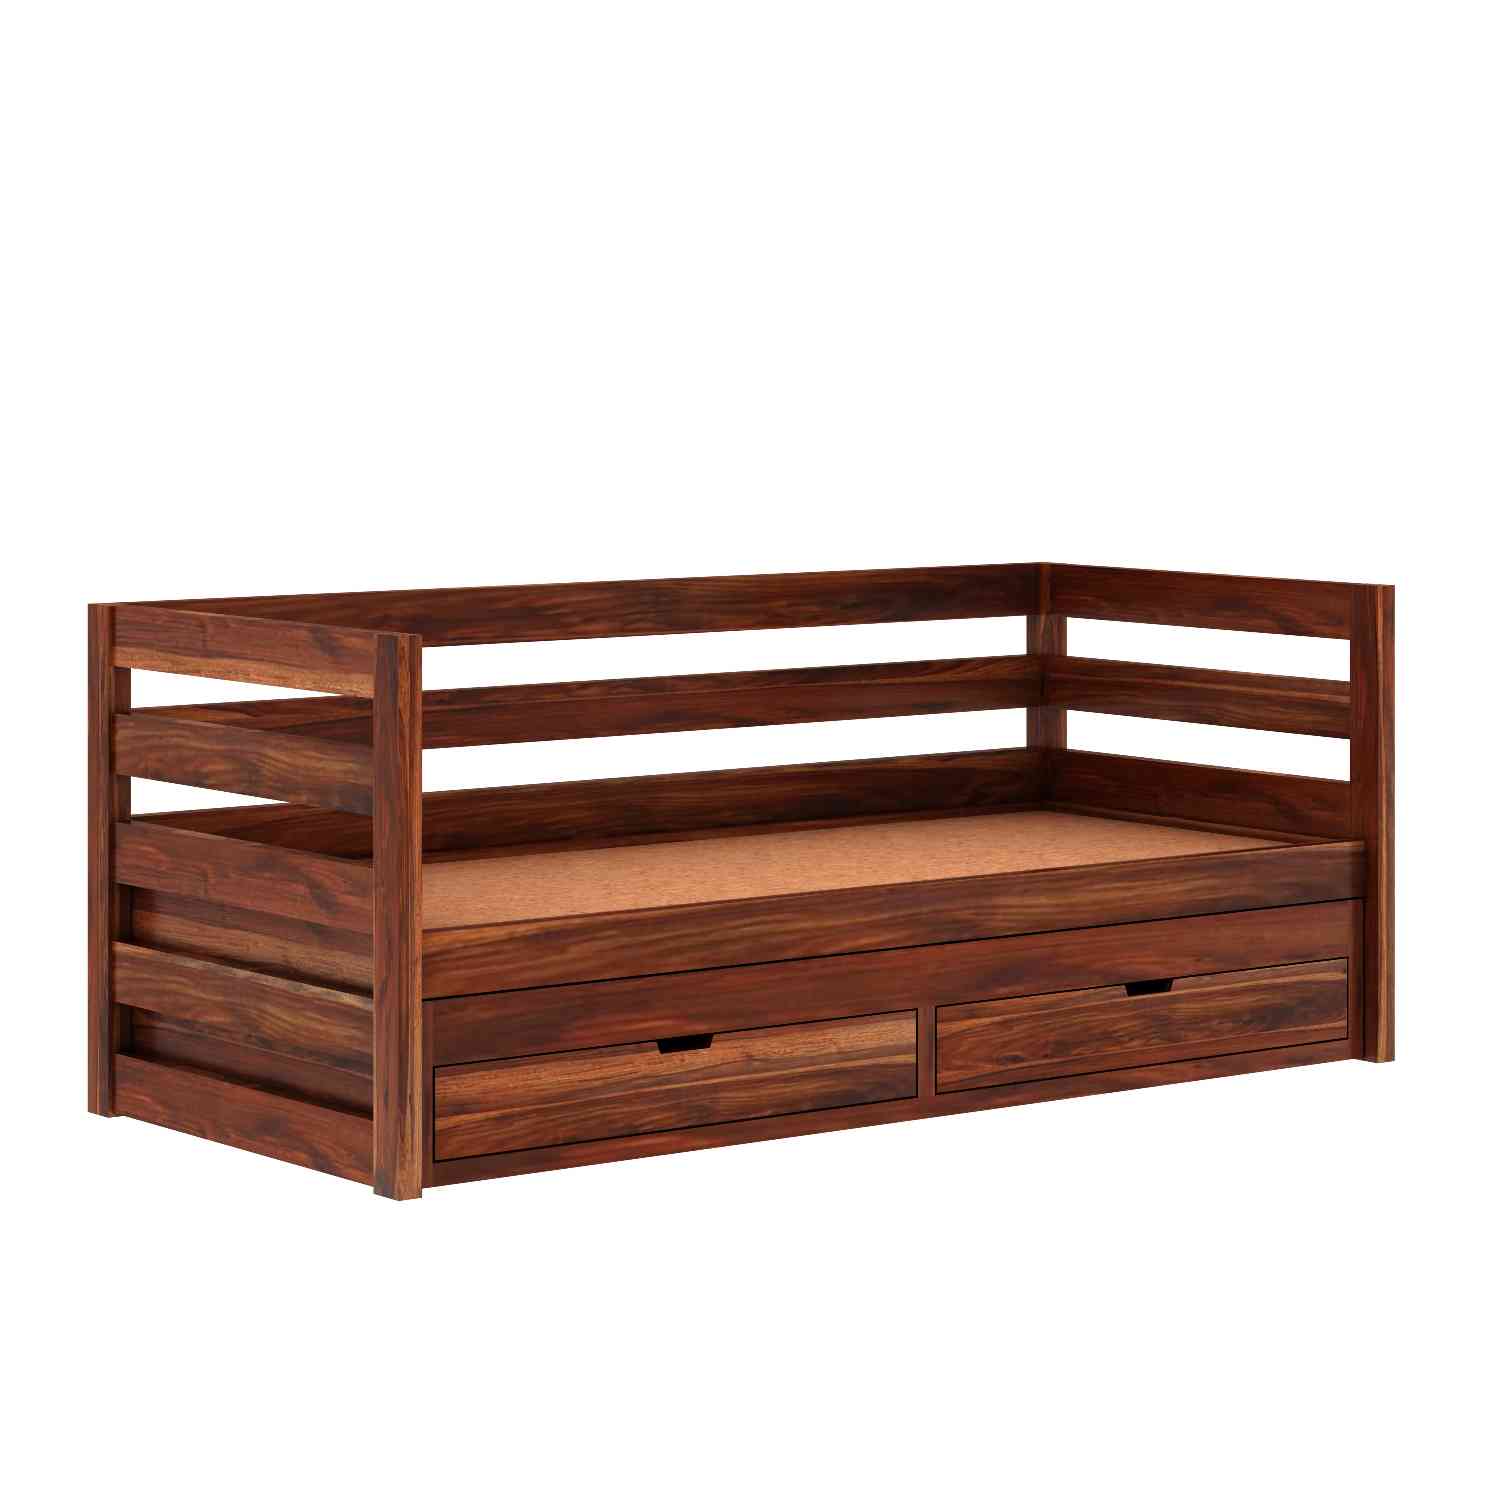 Feelinn Solid Sheesham Wood Trundle Bed For Kids (Without Mattress, Natural Finish)